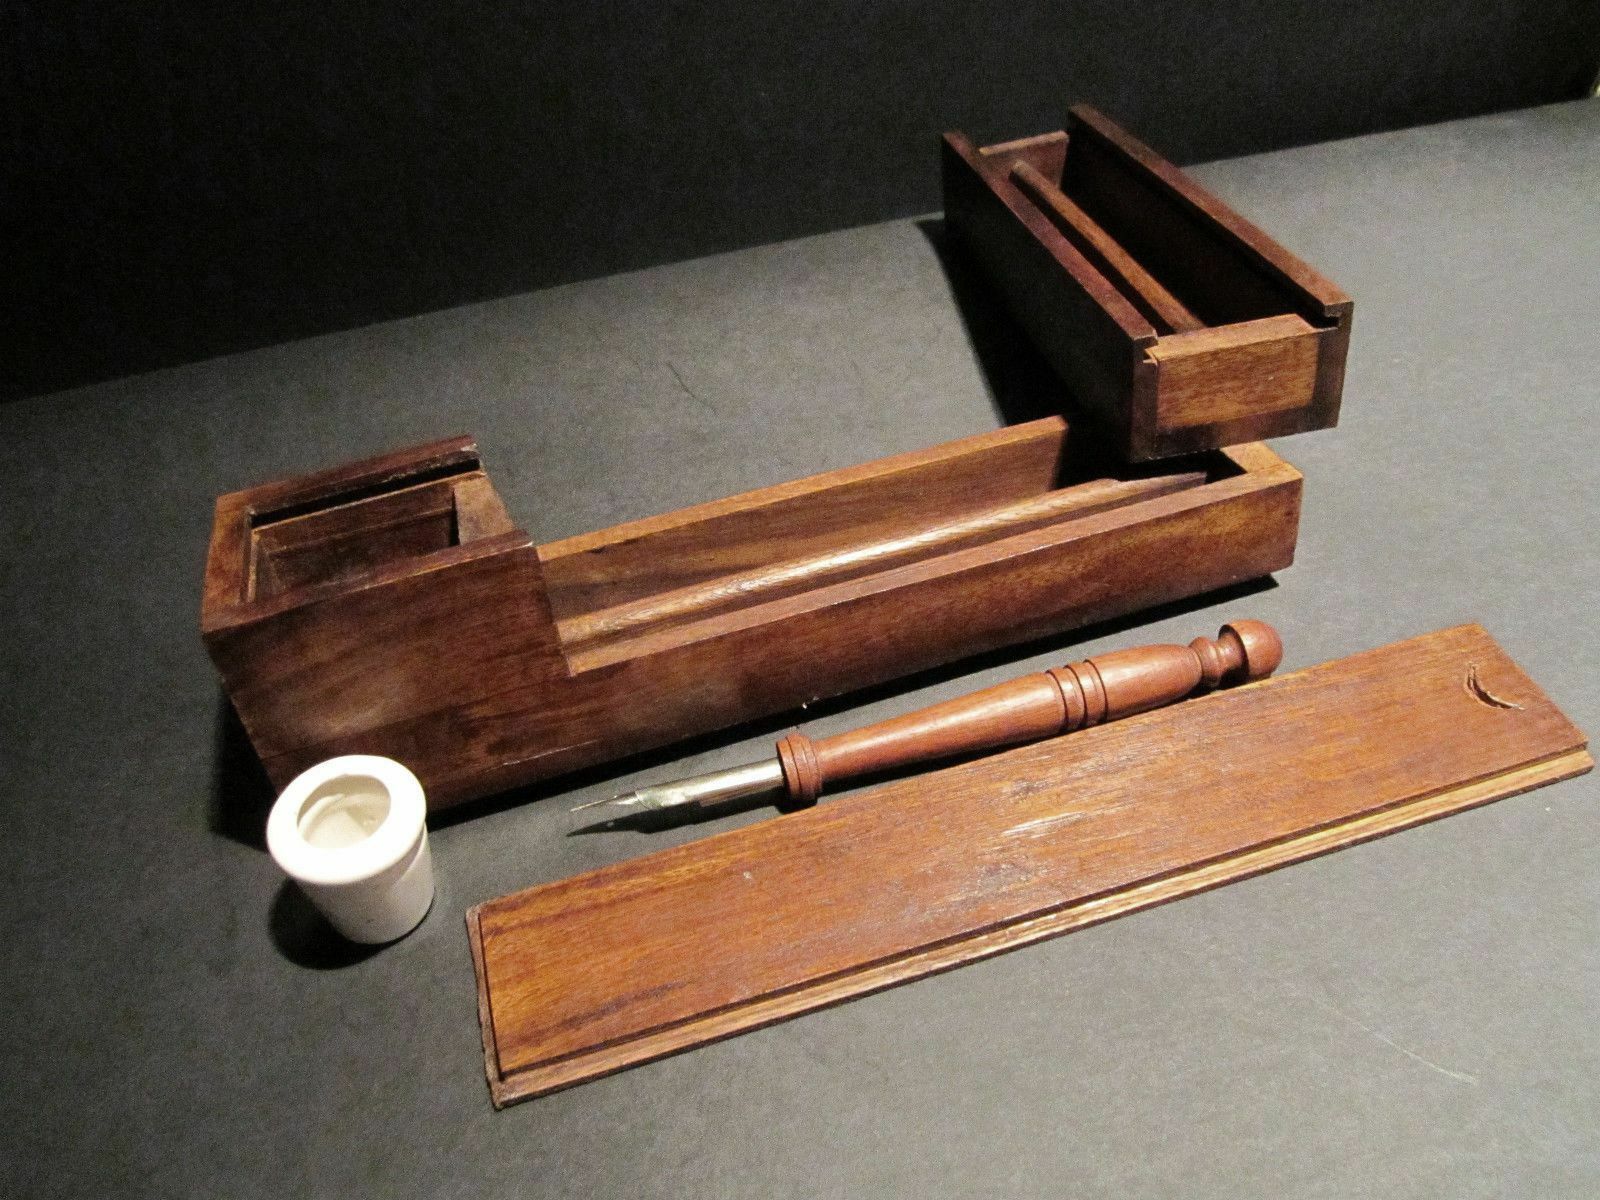 Antique Style Wood Slide Lid Swing Open Writing Box Campaign Inkwell w Dip Pen - Early Home Decor